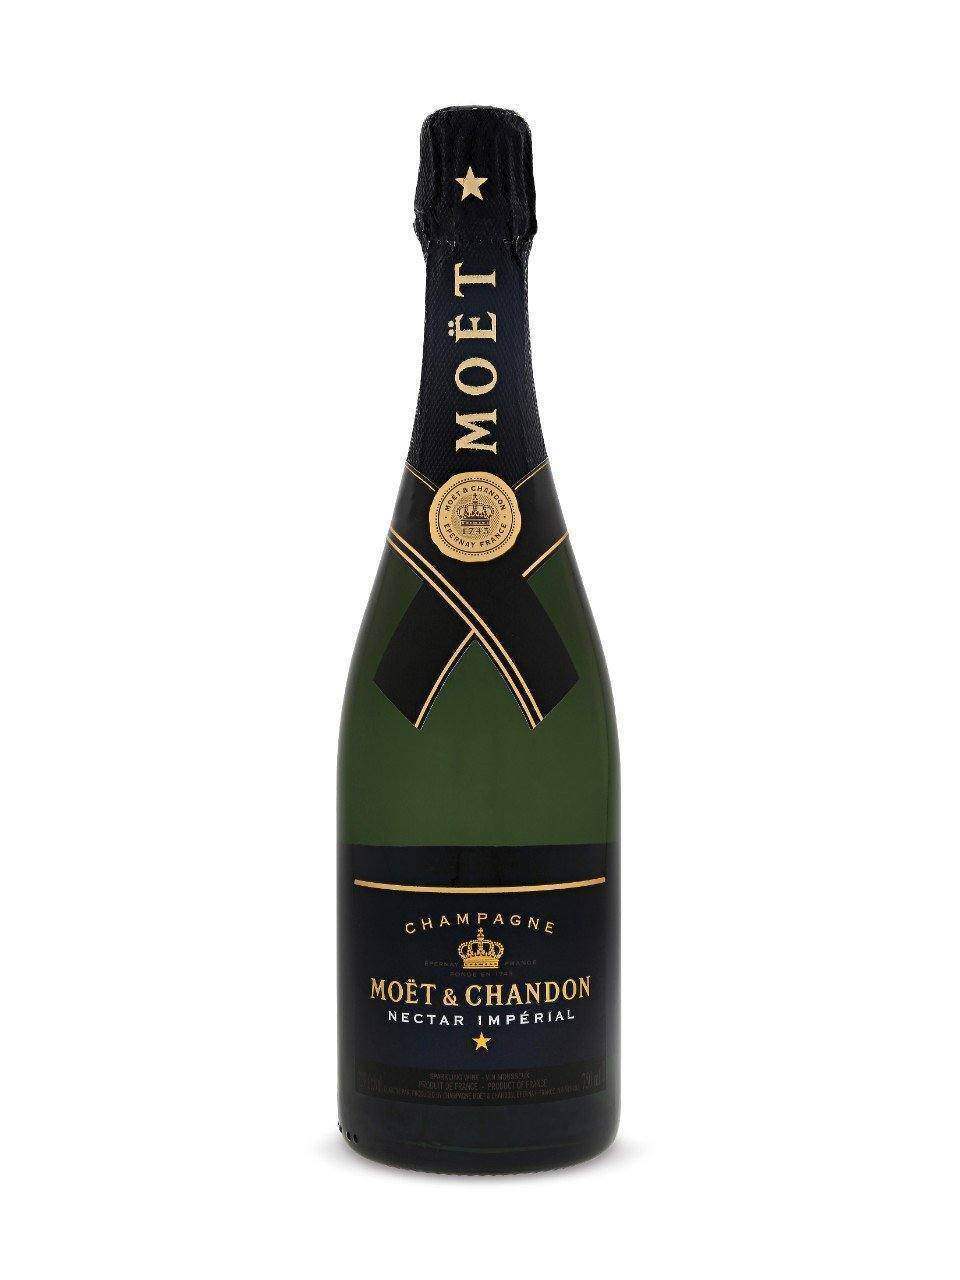 Moet & Chandon Nectar Imperial | Exquisite Wine & Alcohol Gift Delivery Toronto Canada | Vyno